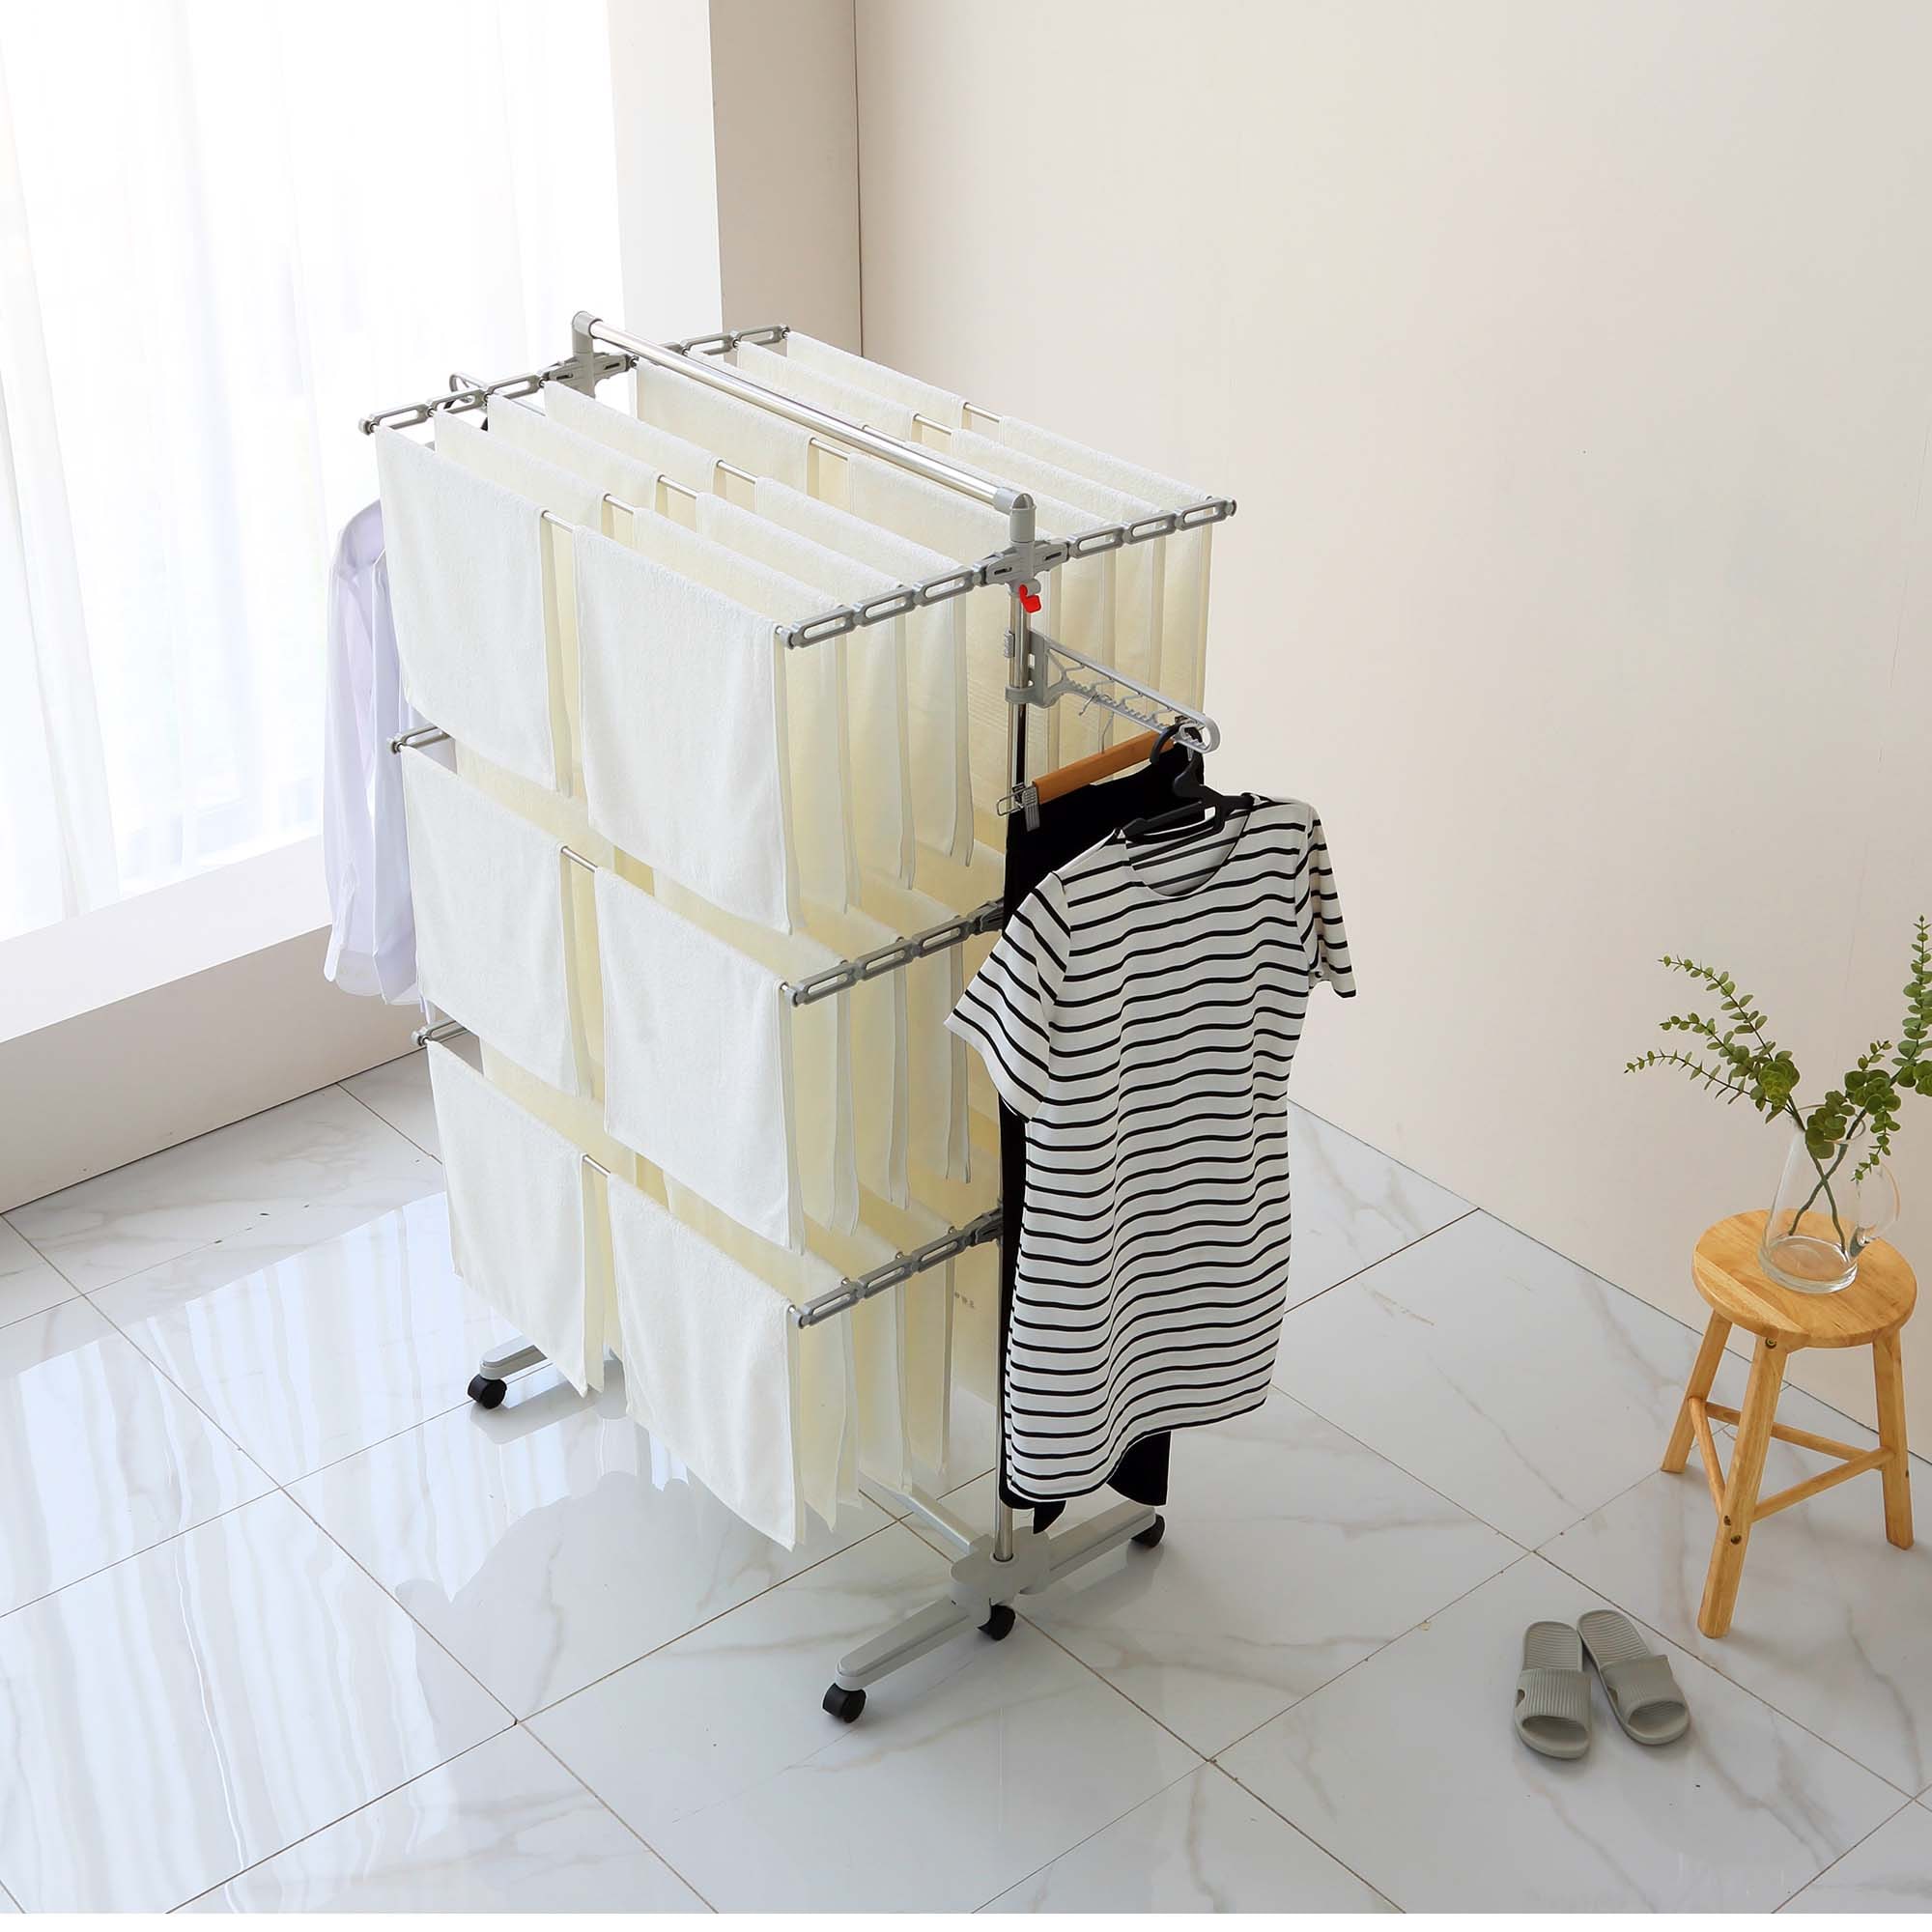 Hastings Home 3-Tier Laundry Drying Rack - 9948925